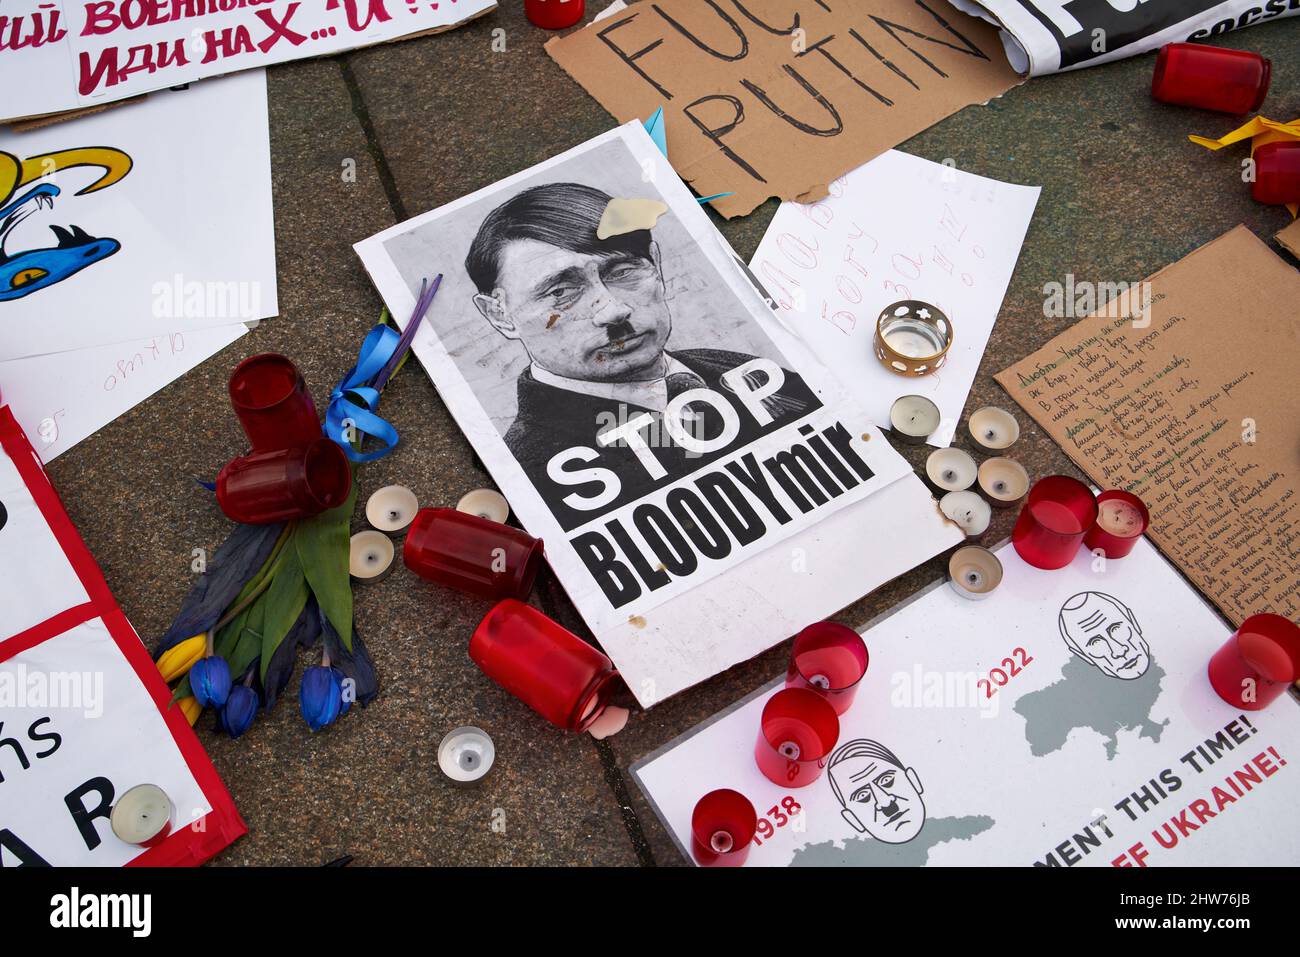 PRAGUE, CZECH REPUBLIC - MARCH 3, 2022: Signs supporting Ukraine and depicting Russian president Vladimir Putin as Adolf Hitler at the base of the mon Stock Photo